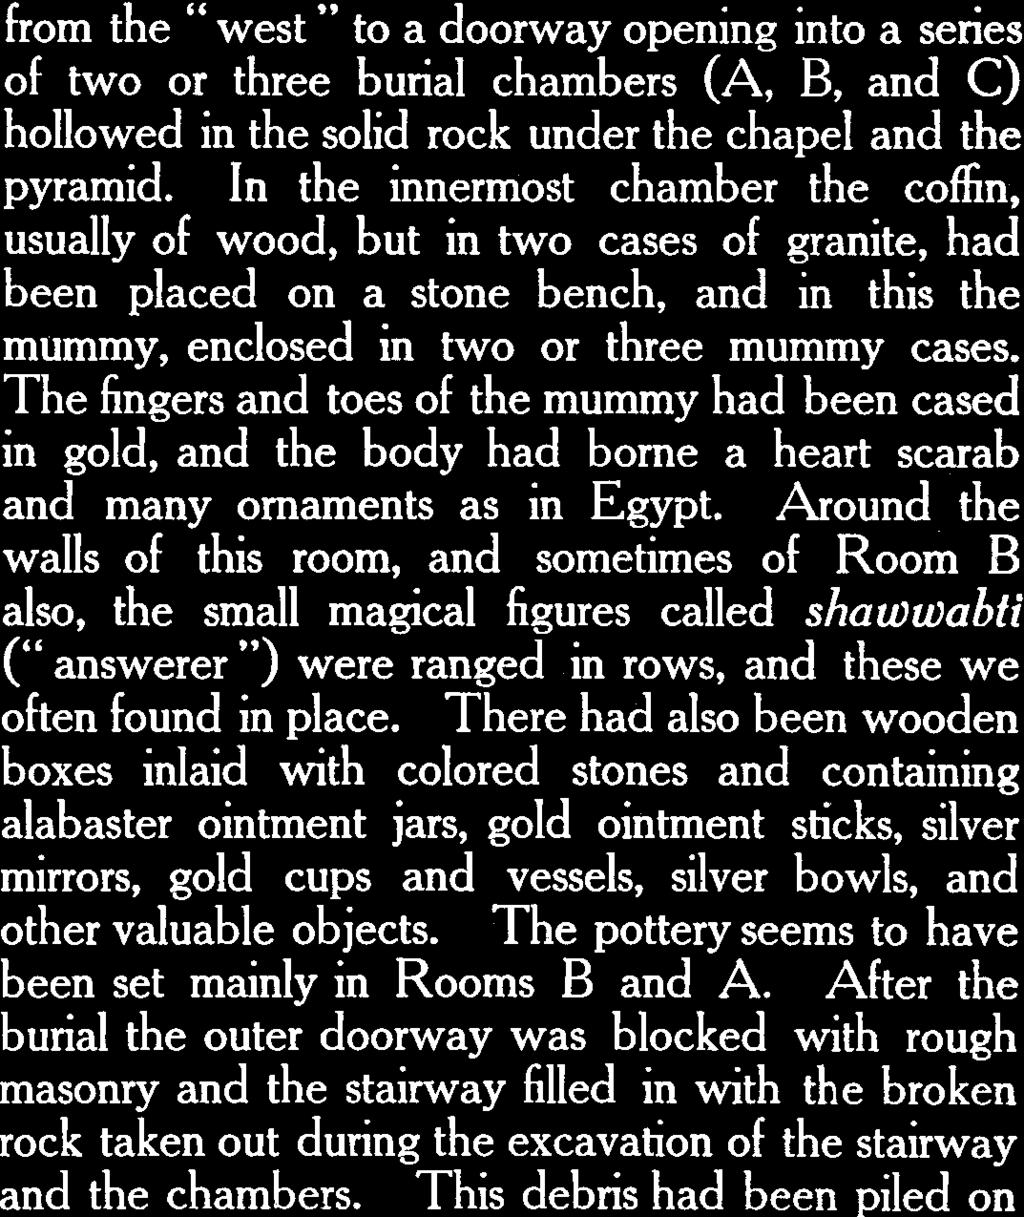 The fingers and toes of the mummy had been cased in gold, and the body had borne a heart scarab and many ornaments as in Egypt.